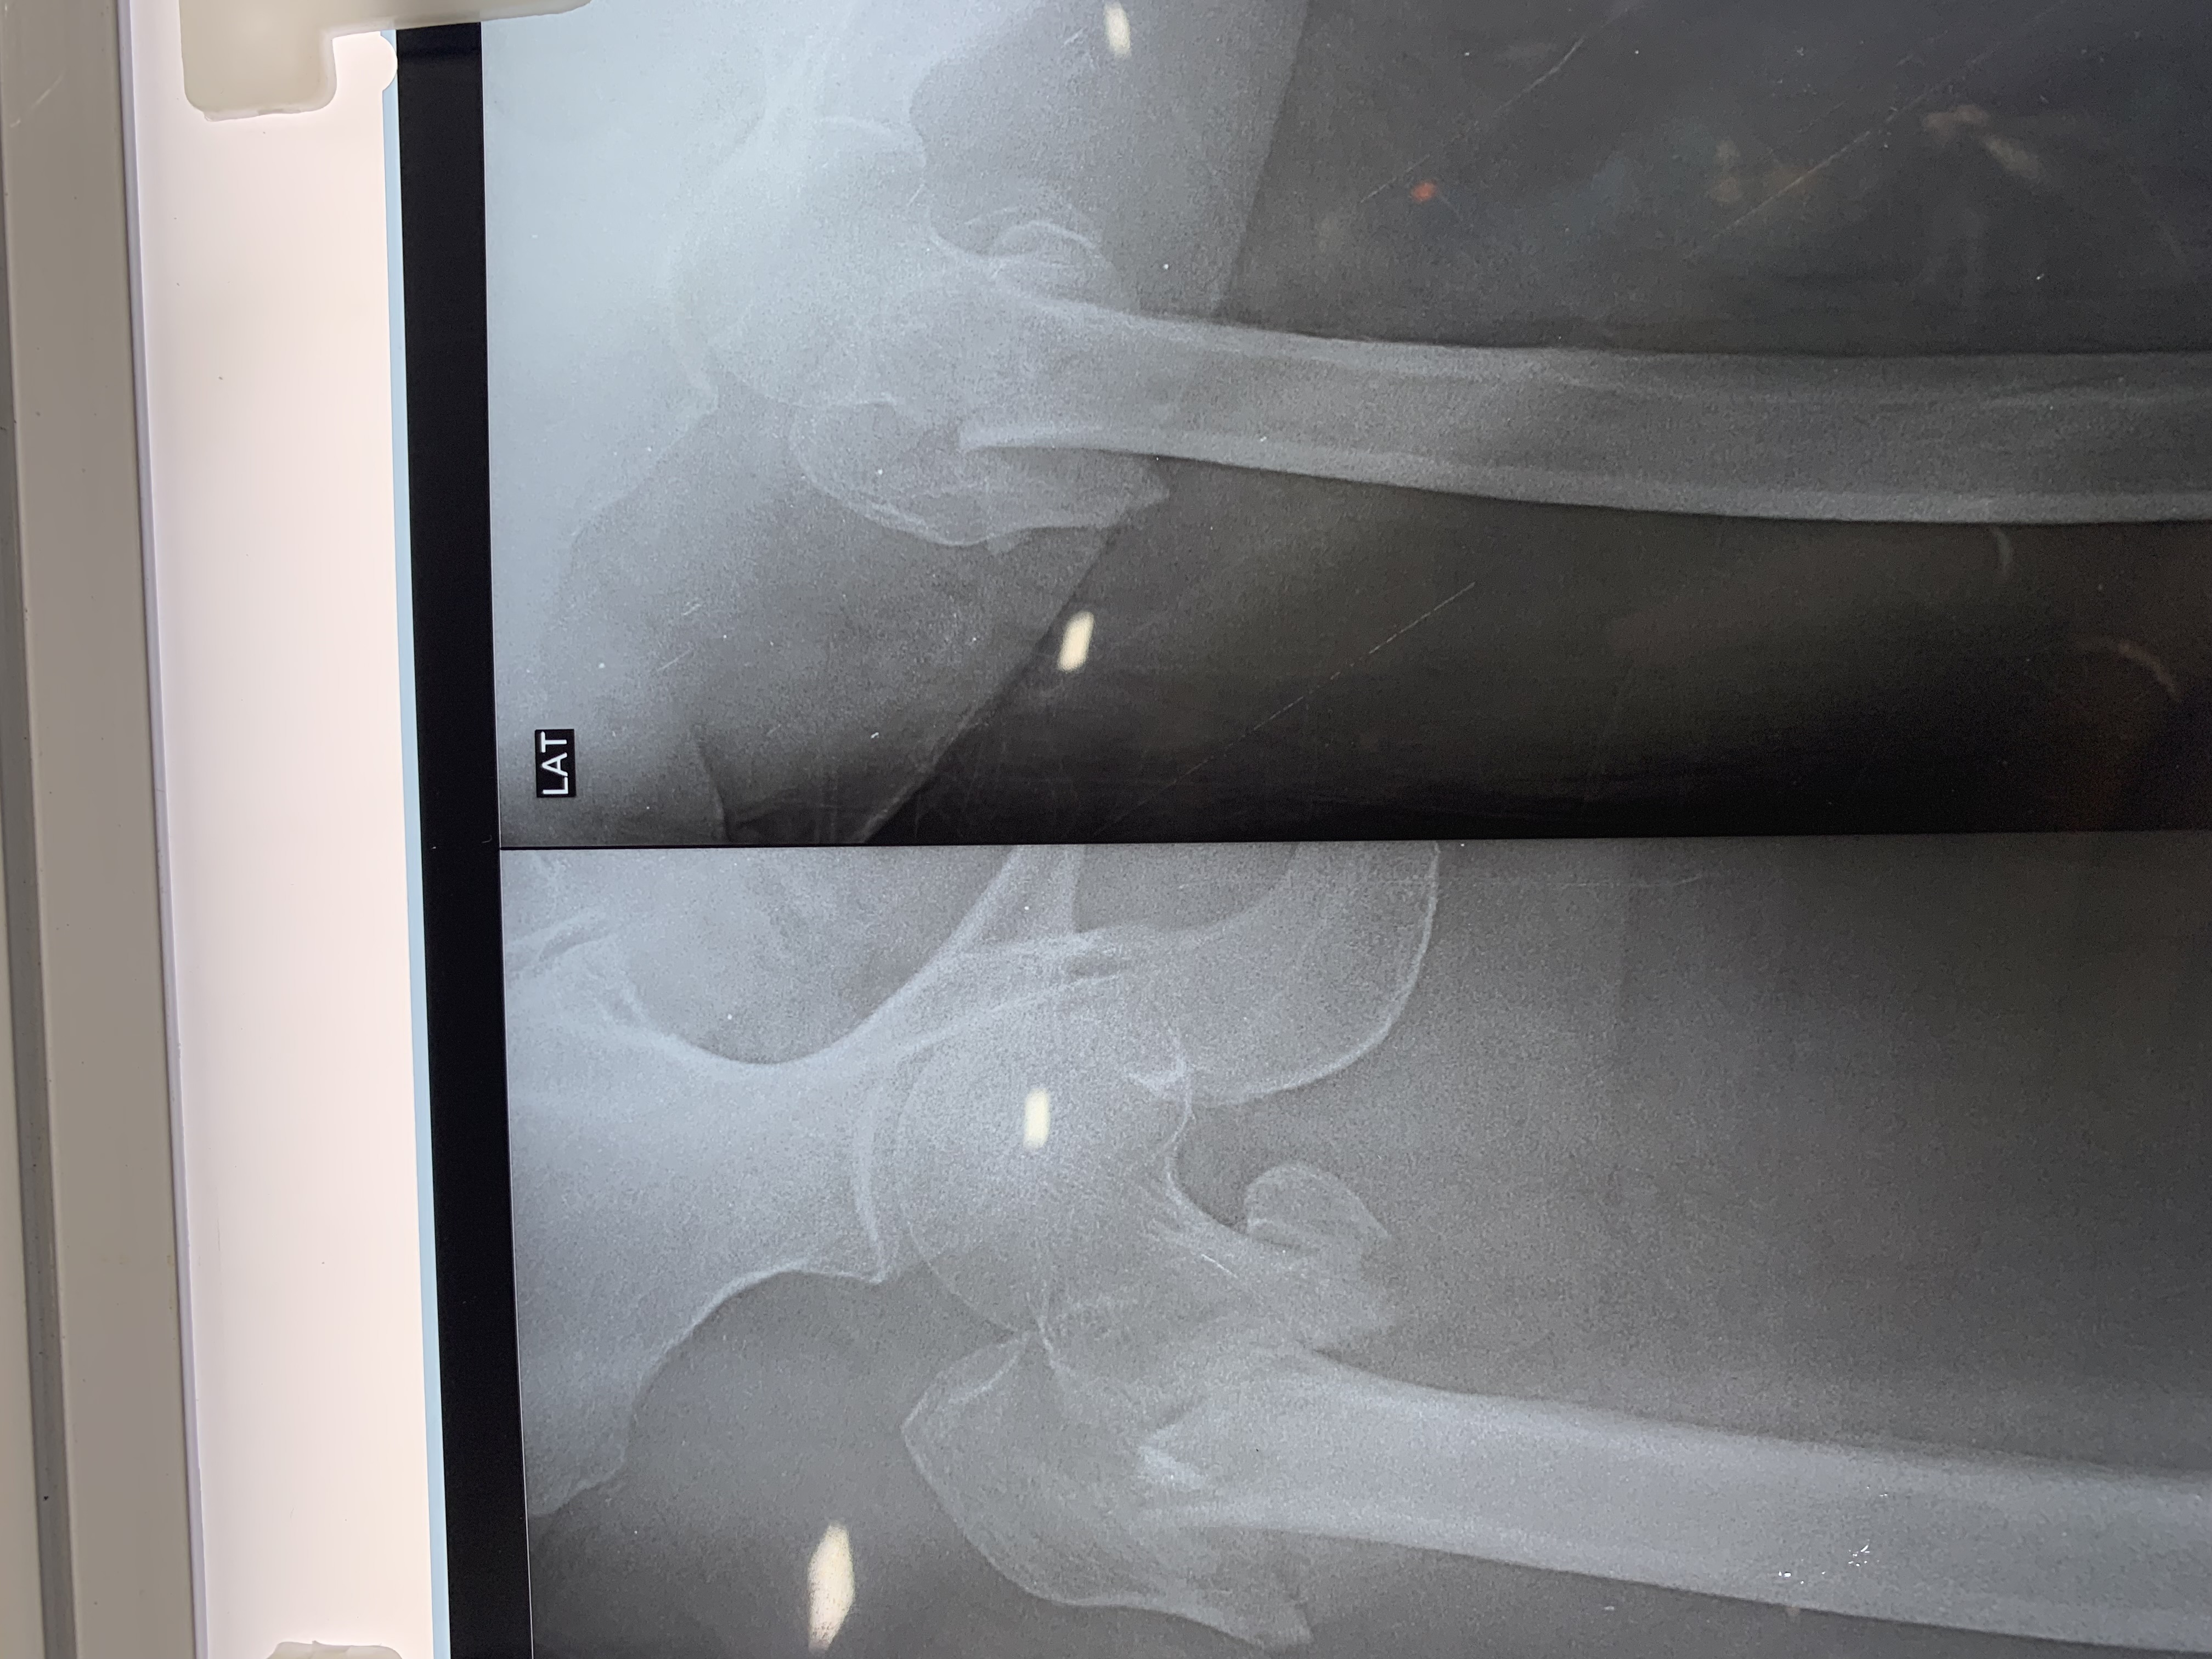 Intertrochanteric femur comminuted fracture treated by Closed Reduction & Internal Fixation with PFNA2 Titanium Interlocking Nail